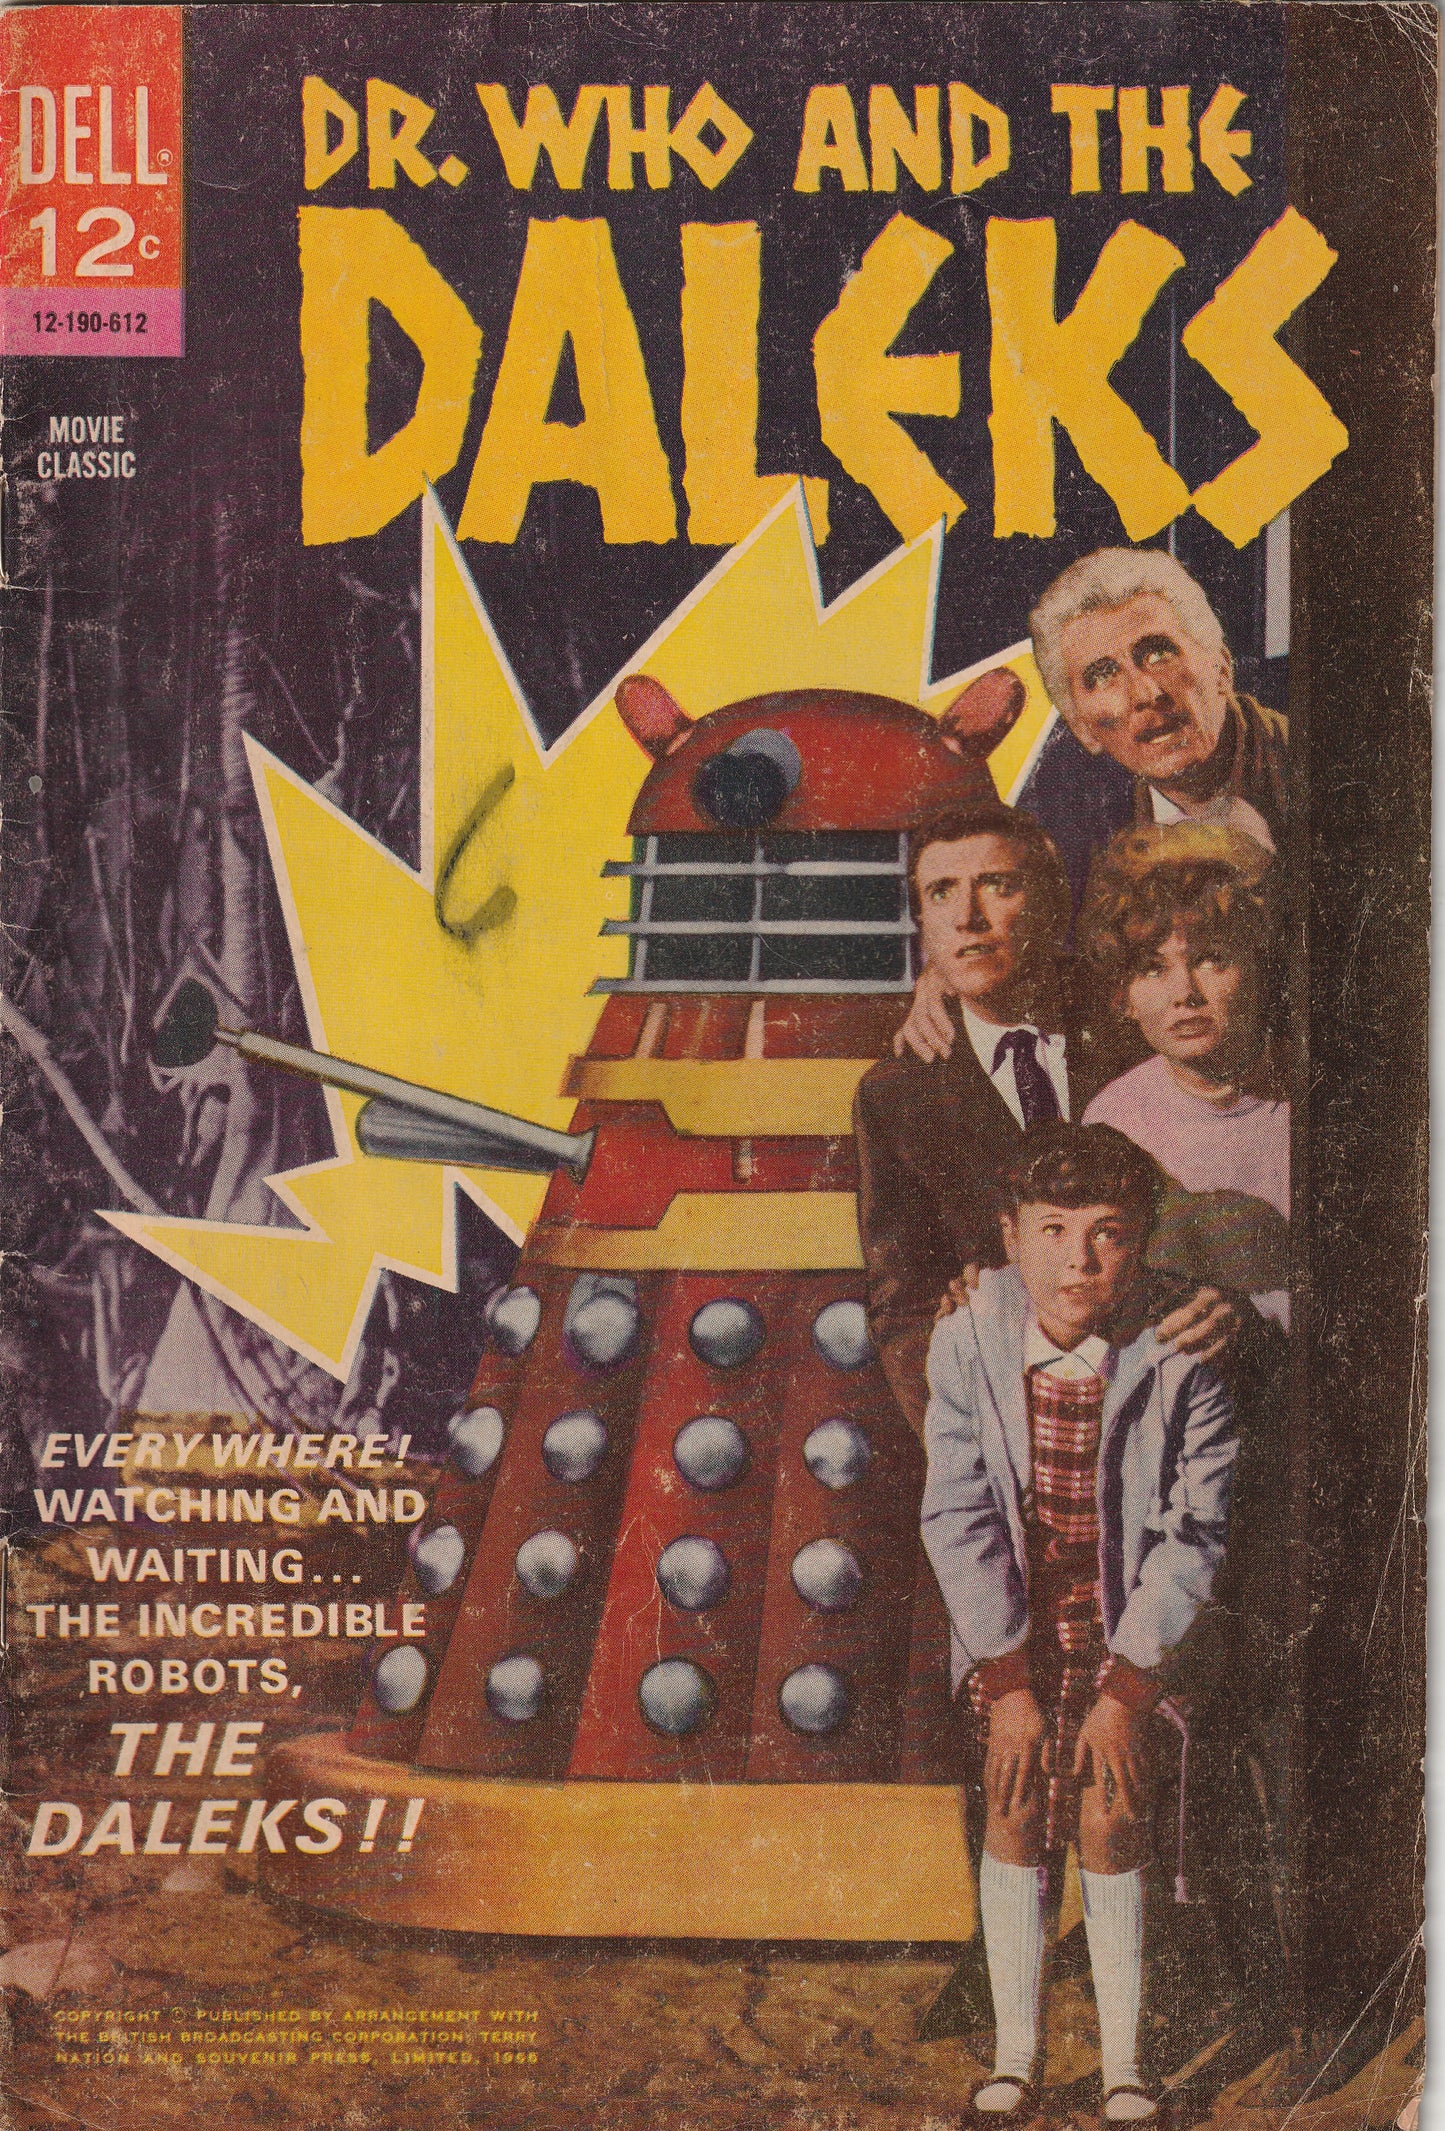 Movie Classics - Dr. Who and the Daleks (1966) - 1st US appearance of Dr Who, Peter Cushing photo cover